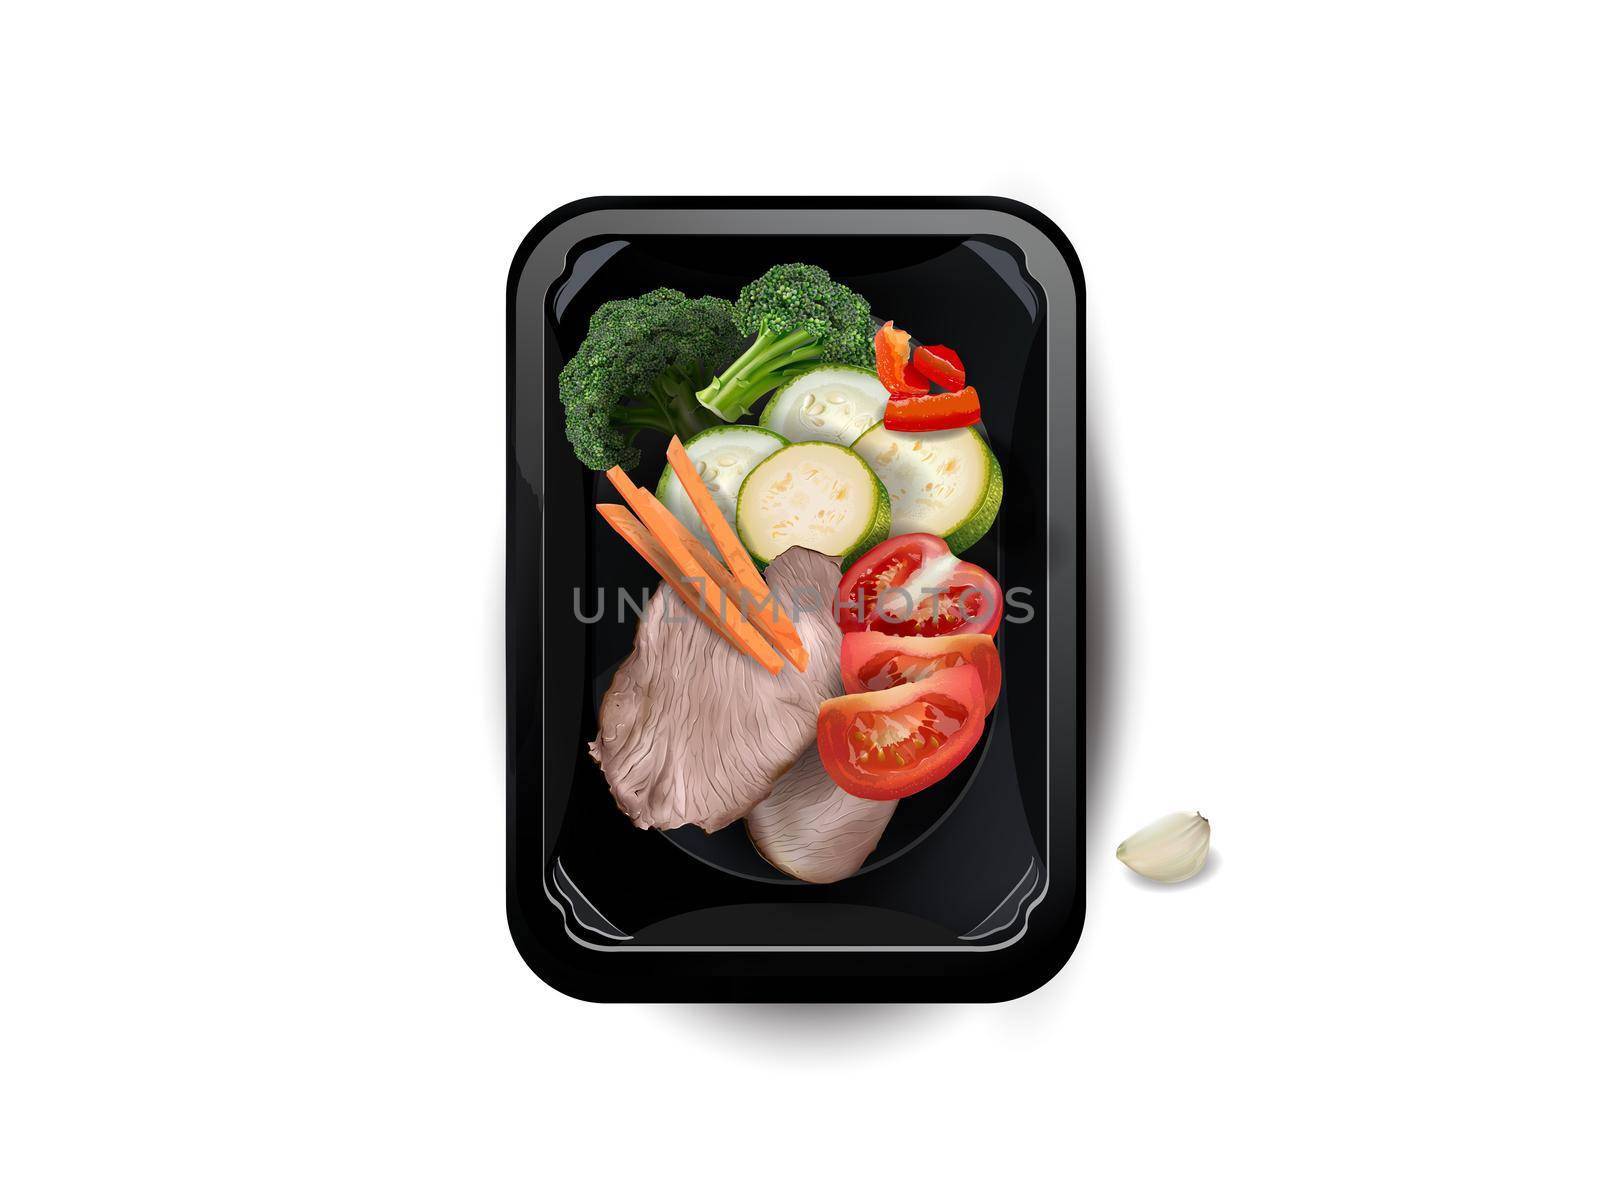 Boiled turkey meat with zucchini, broccoli, tomatoes, carrot and garlic in a lunchbox on a white background, top view. Realistic style illustration.